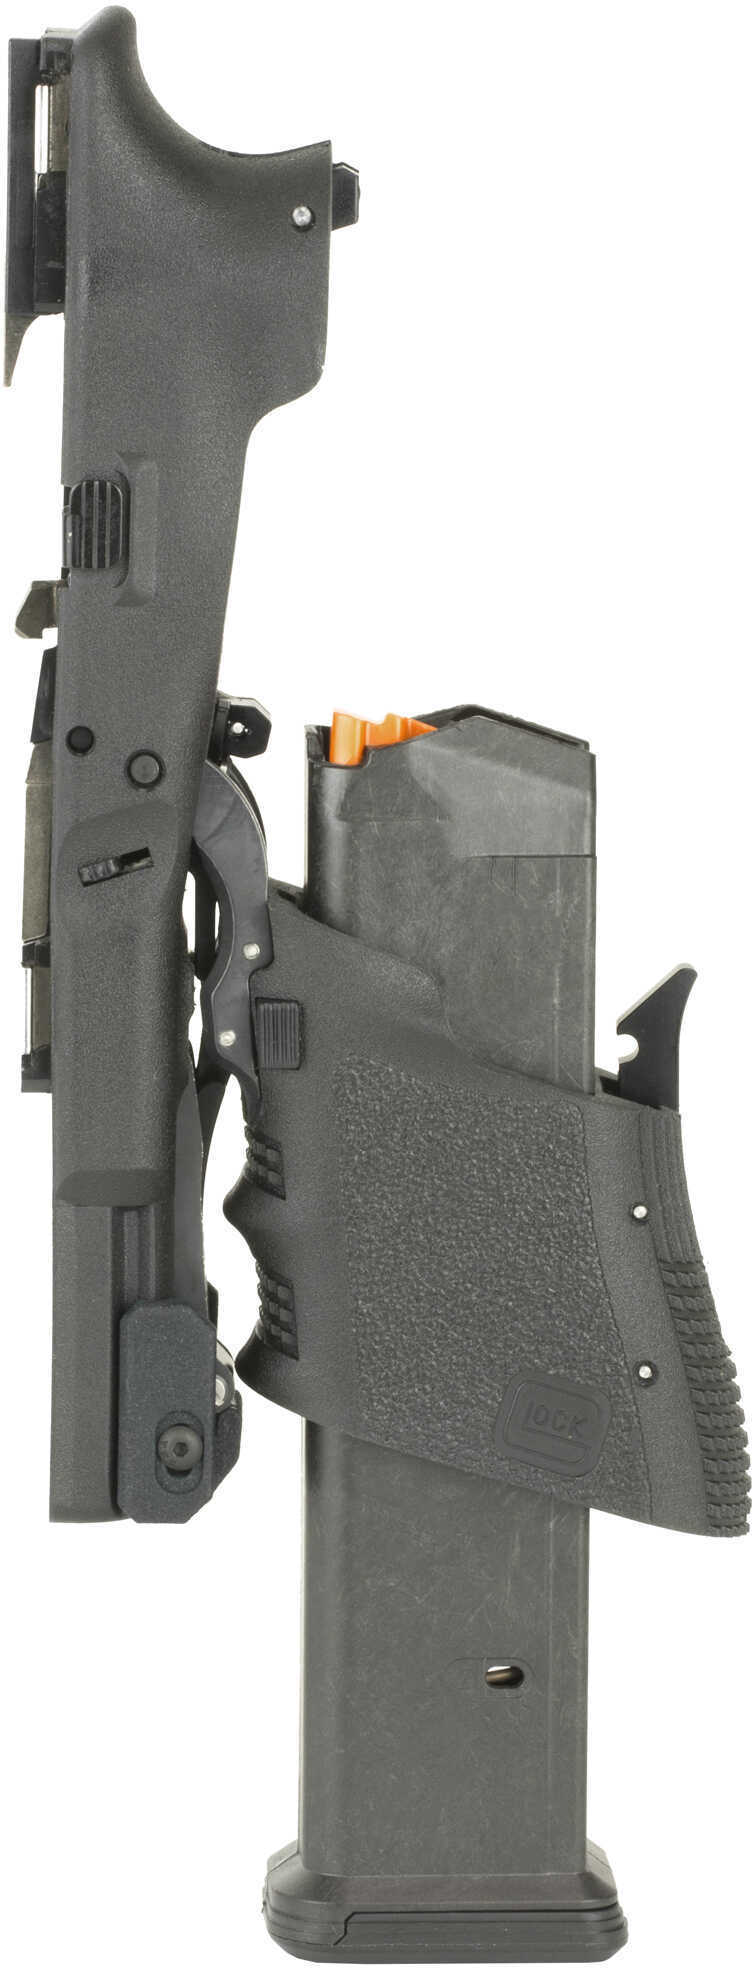 Full Conceal for Glock 19 (Gen 3) Lower Receiver ONLY w/ M3D Modification